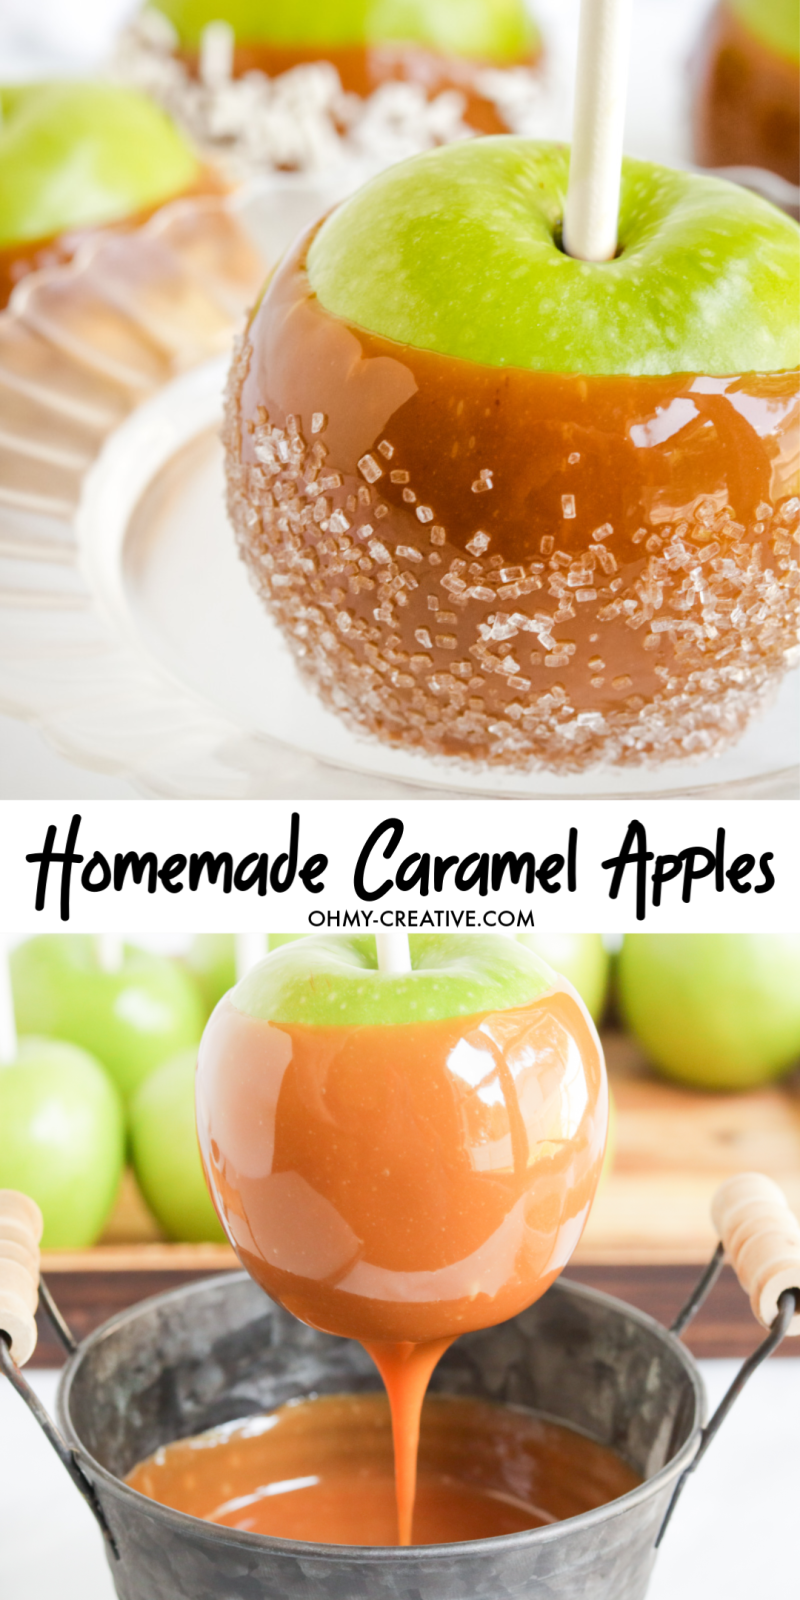 2 photo collage of caramel apples. One apple has topping added to it and the second photo is an apple being dipped in hot caramel